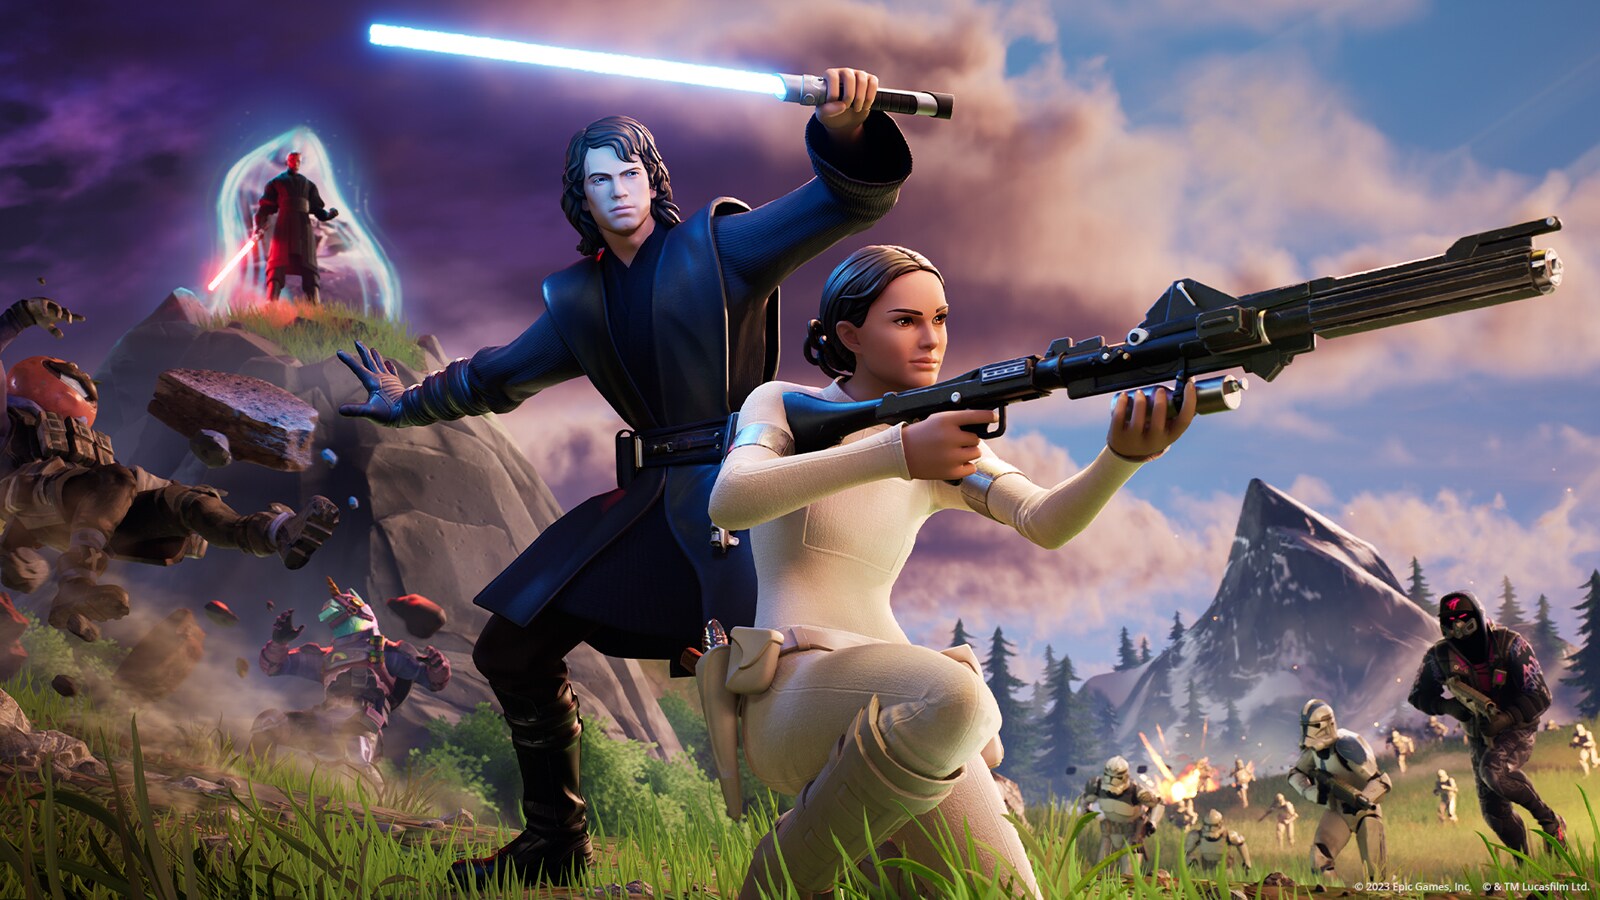 New Star Wars x Fortnite Activation to Celebrate the Prequel